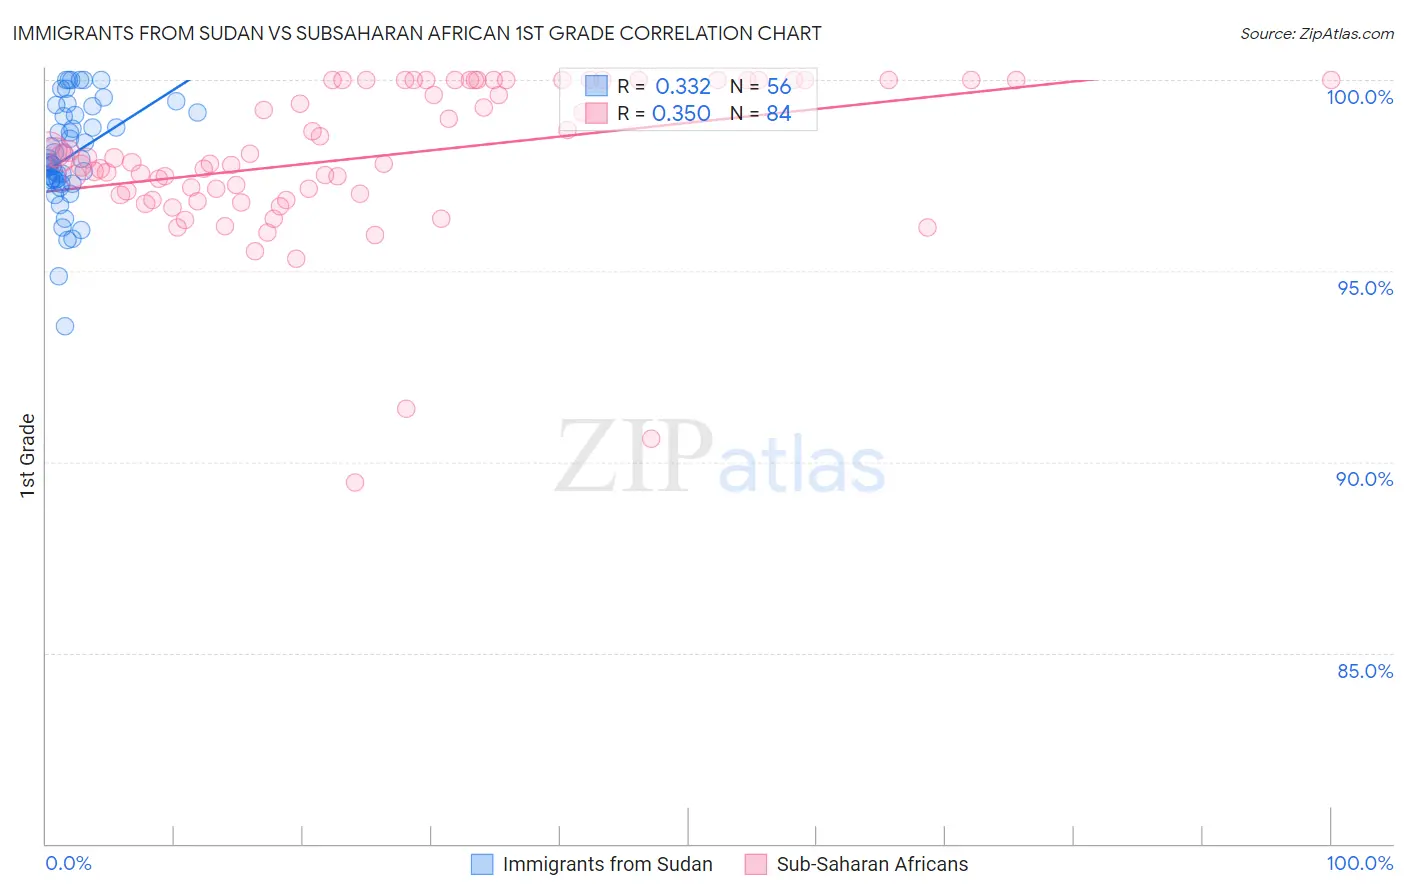 Immigrants from Sudan vs Subsaharan African 1st Grade